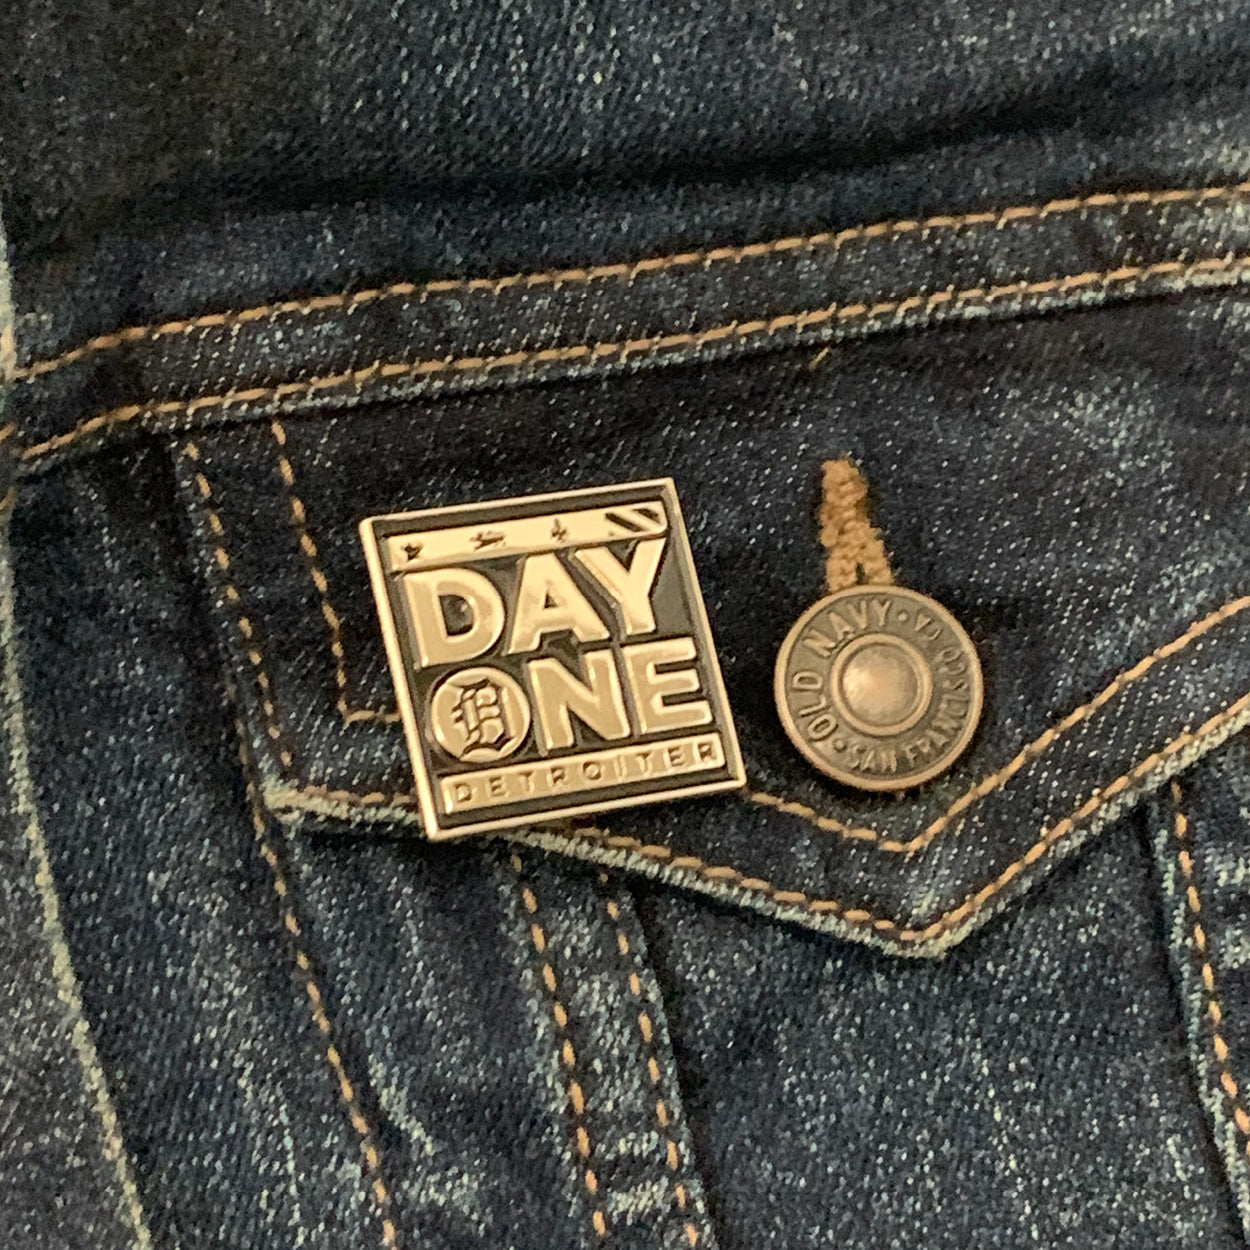 day one detroiter pin